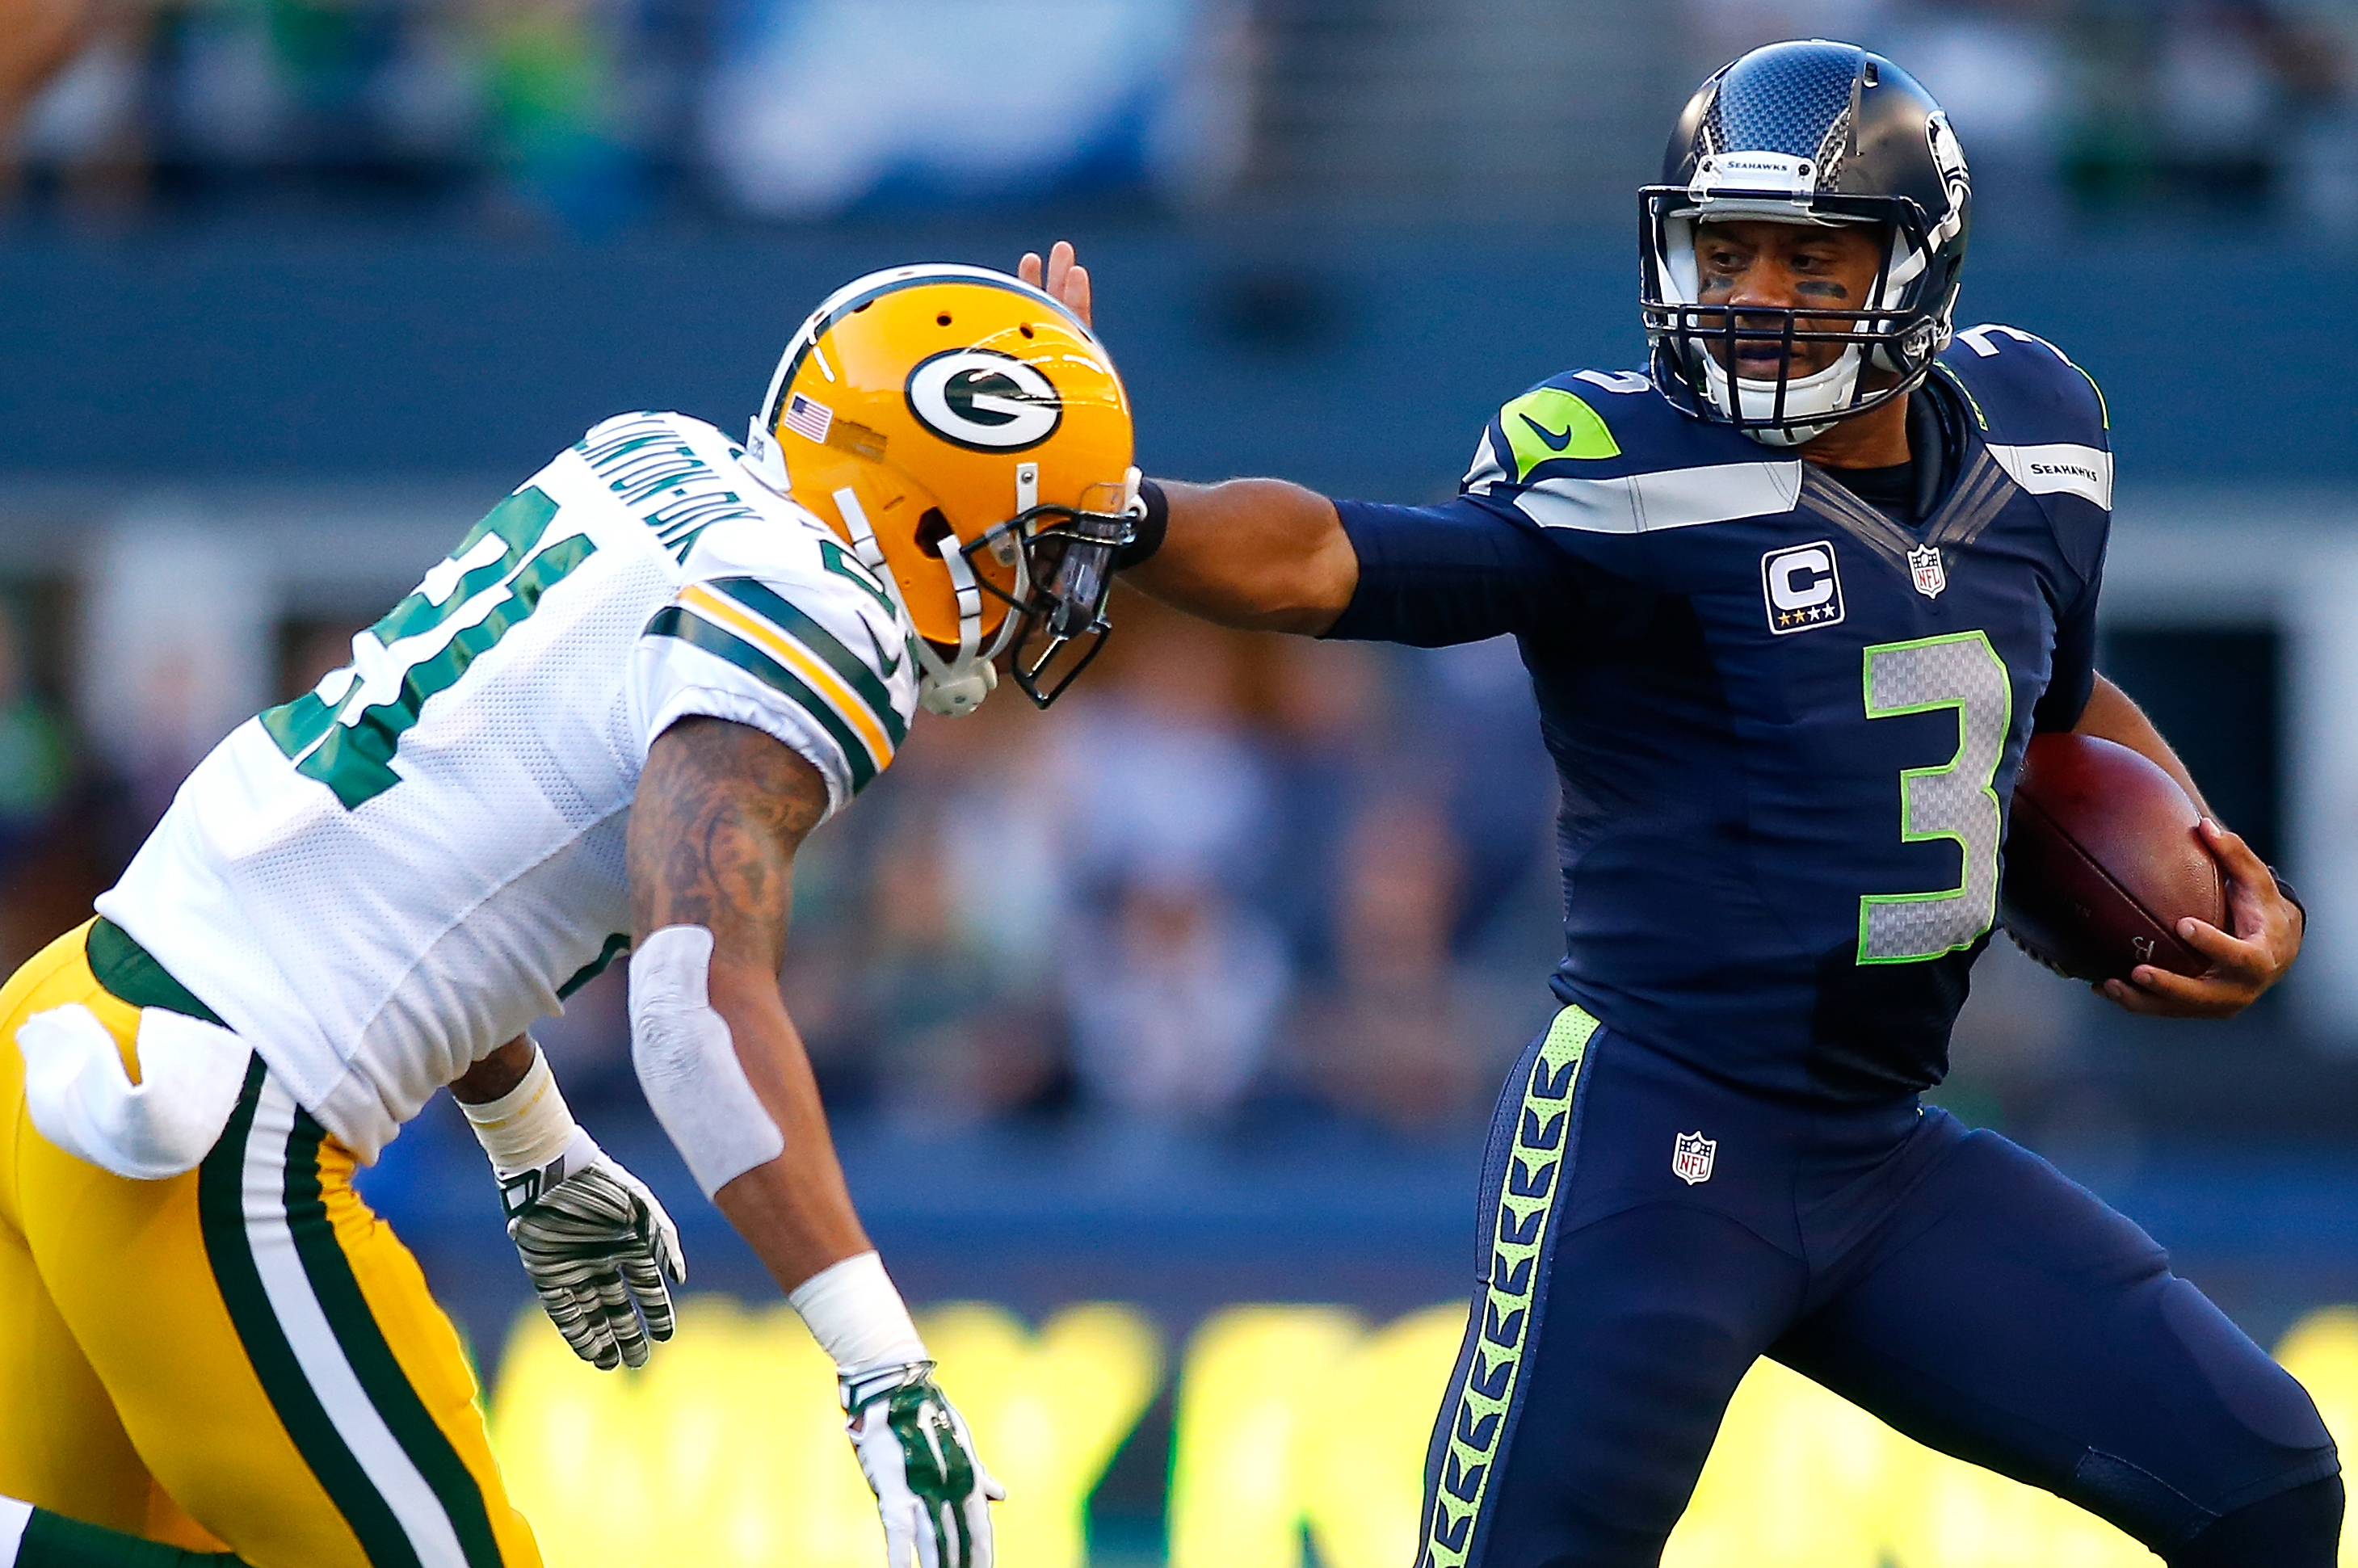 Packers vs Seahawks: Latest Game Info, Odds Guide for NFC